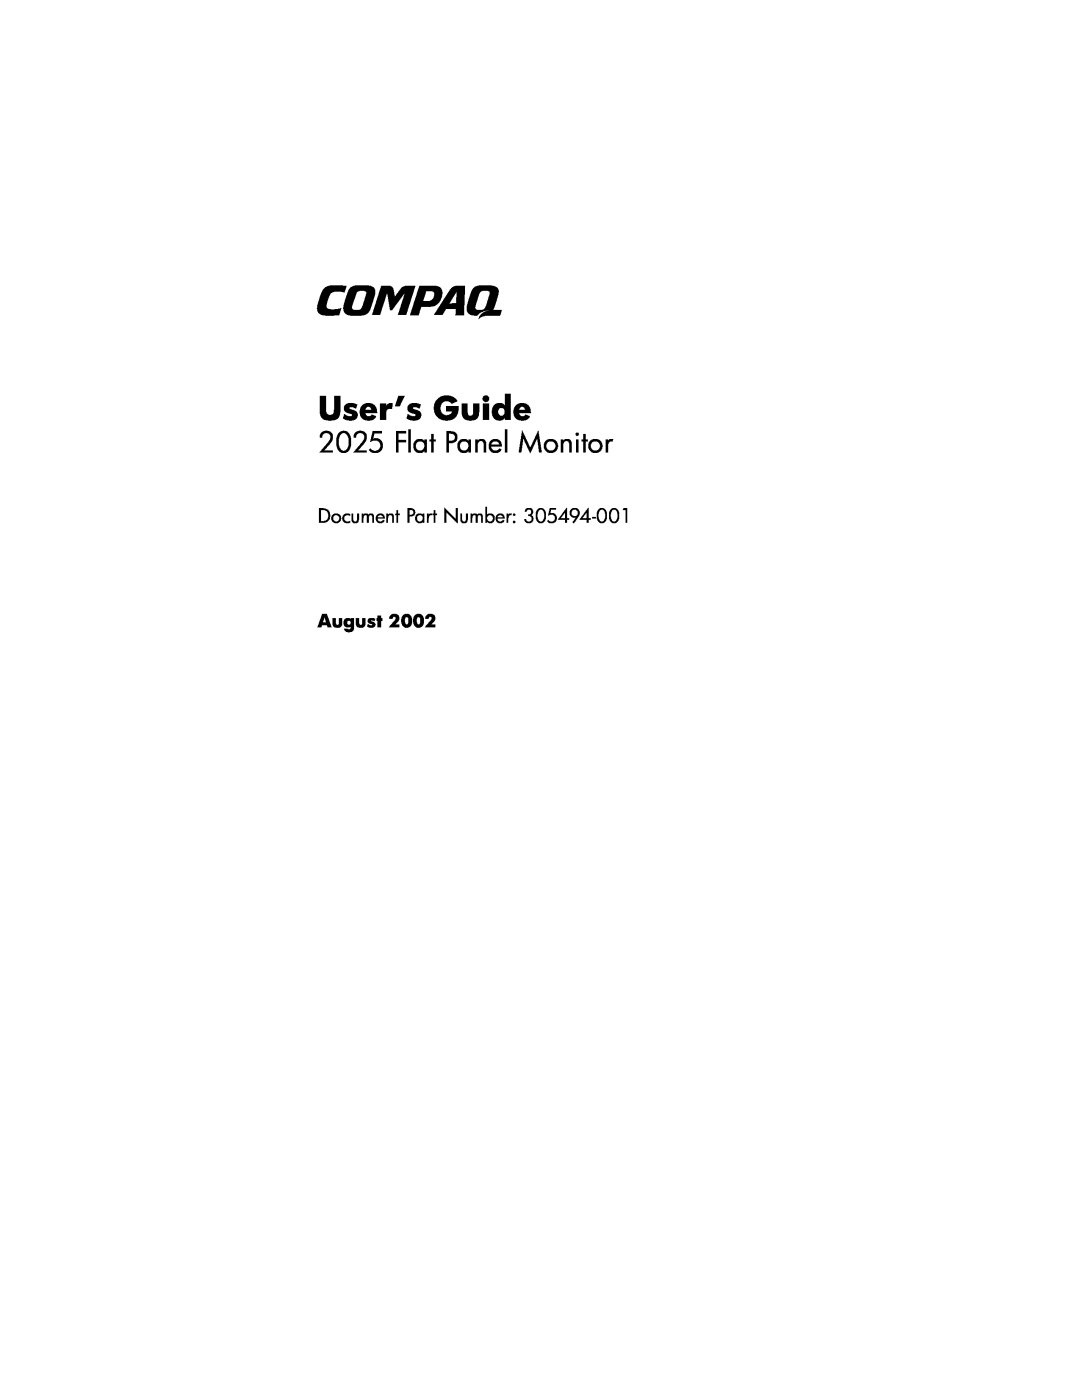 Compaq 2025 manual Flat Panel Monitor, Document Part Number, User’s Guide, August 